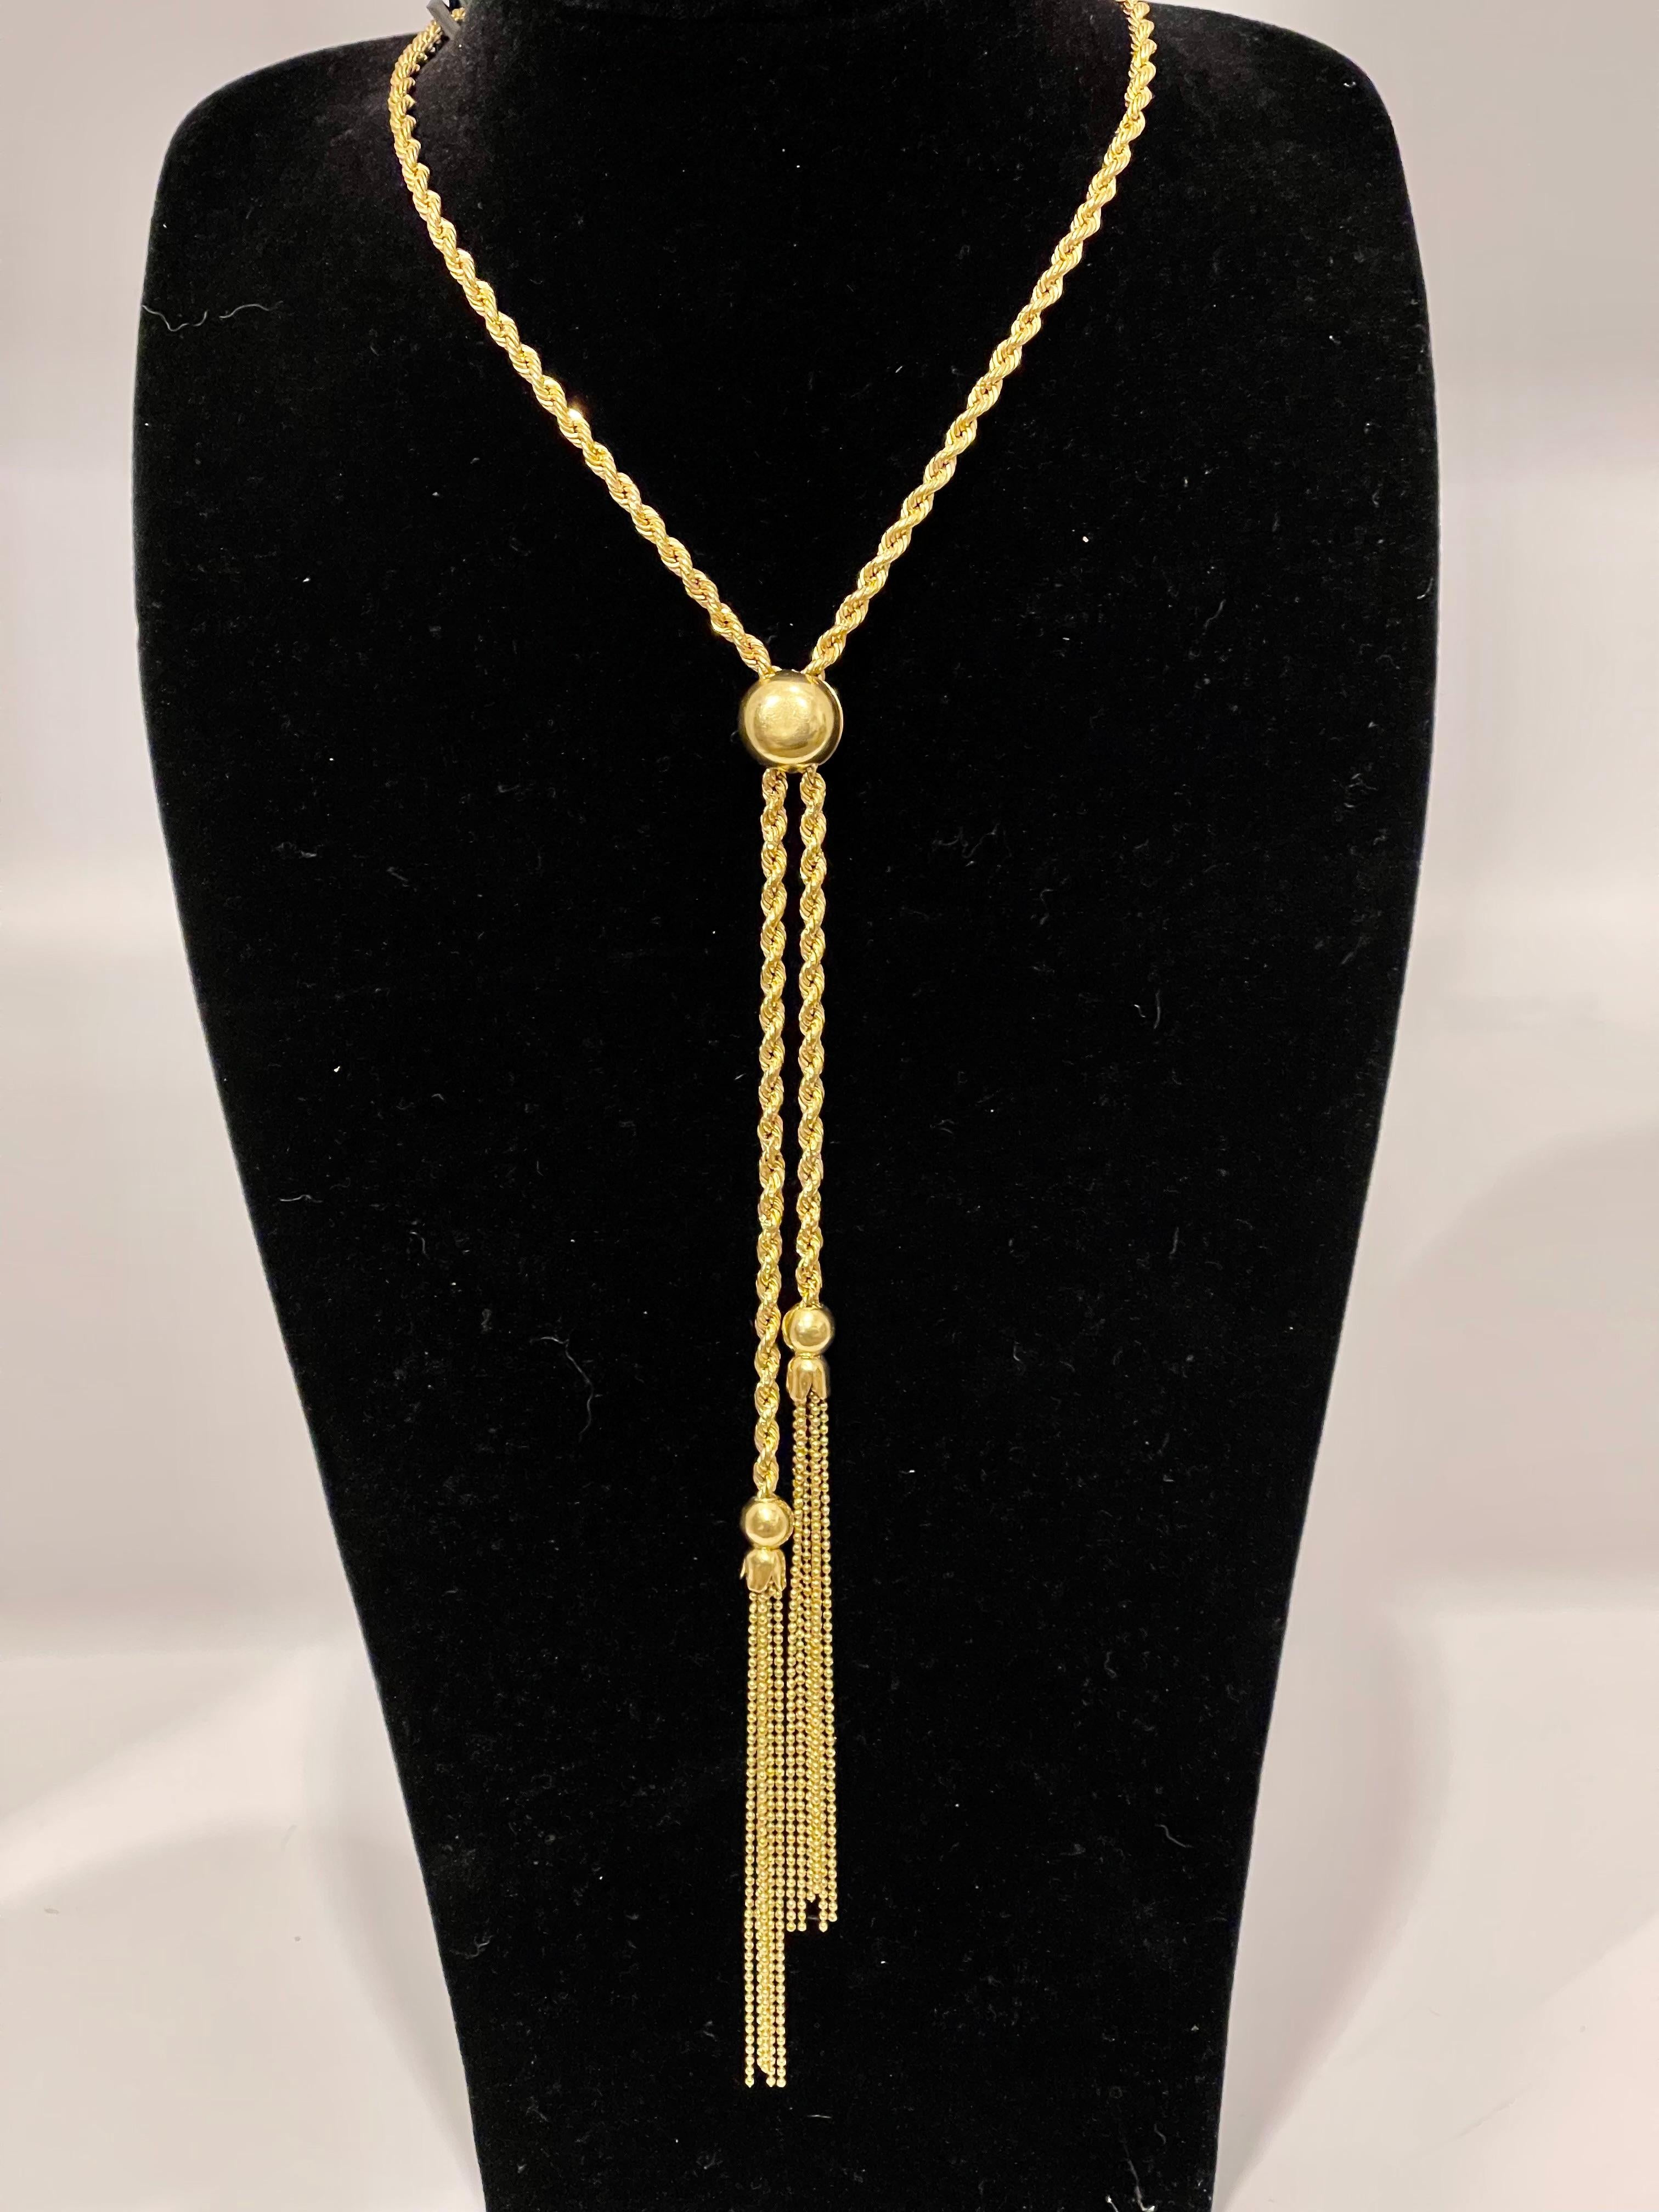 Vintage 18k Gold 18.7 Gm Rope Chain Adjustable Sliding Chain with Ball 13